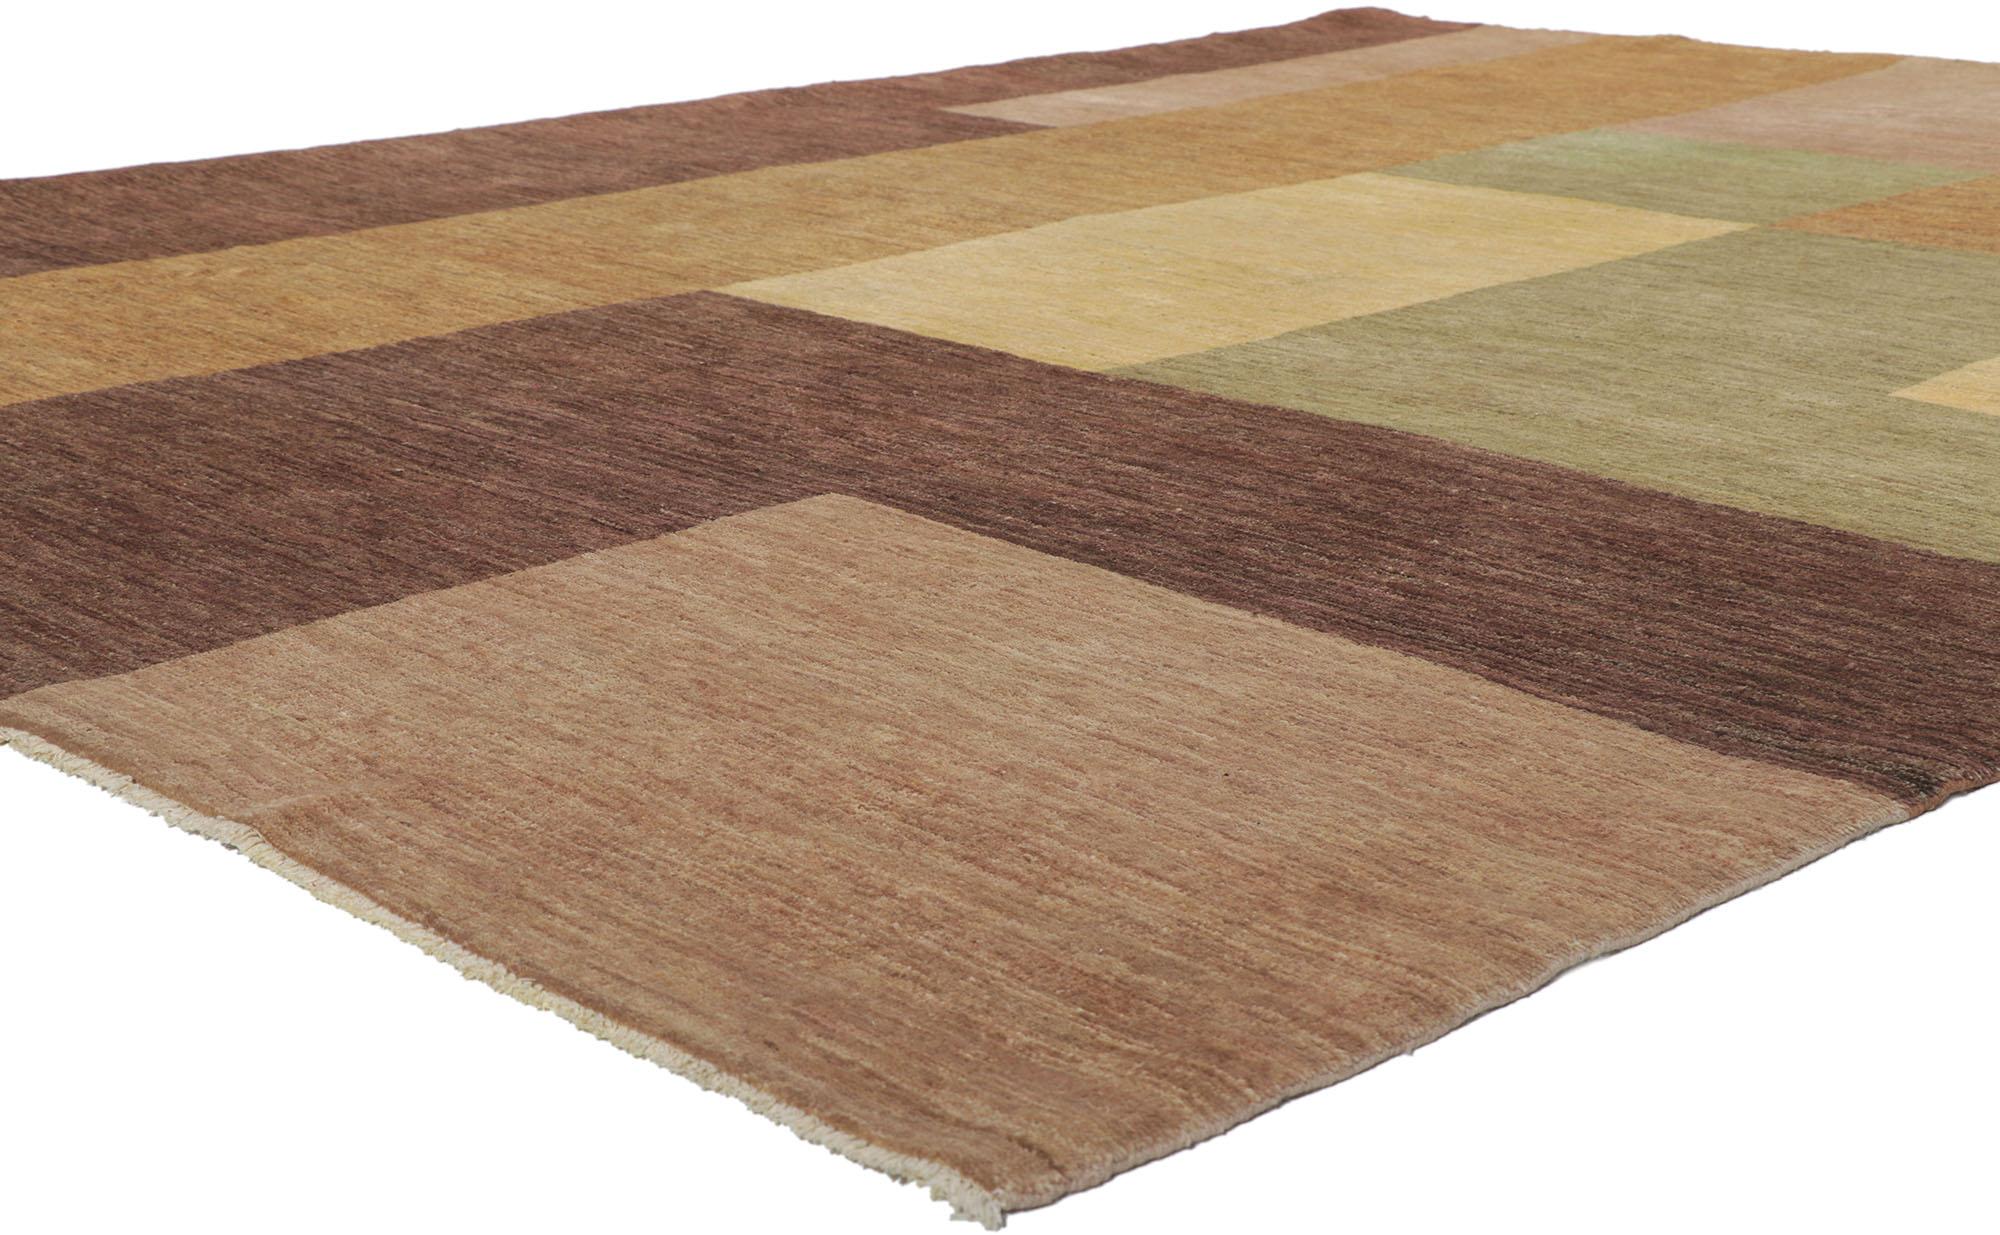 78203 Vintage Odegard rug with Modern Bauhaus Style 08'03 x 10'04. Displaying a linear art form composed of squares, rectangles, and cubes, this hand knotted wool contemporary Odegard Tibetan rug embodies modern Bauhaus style. The textures and lines